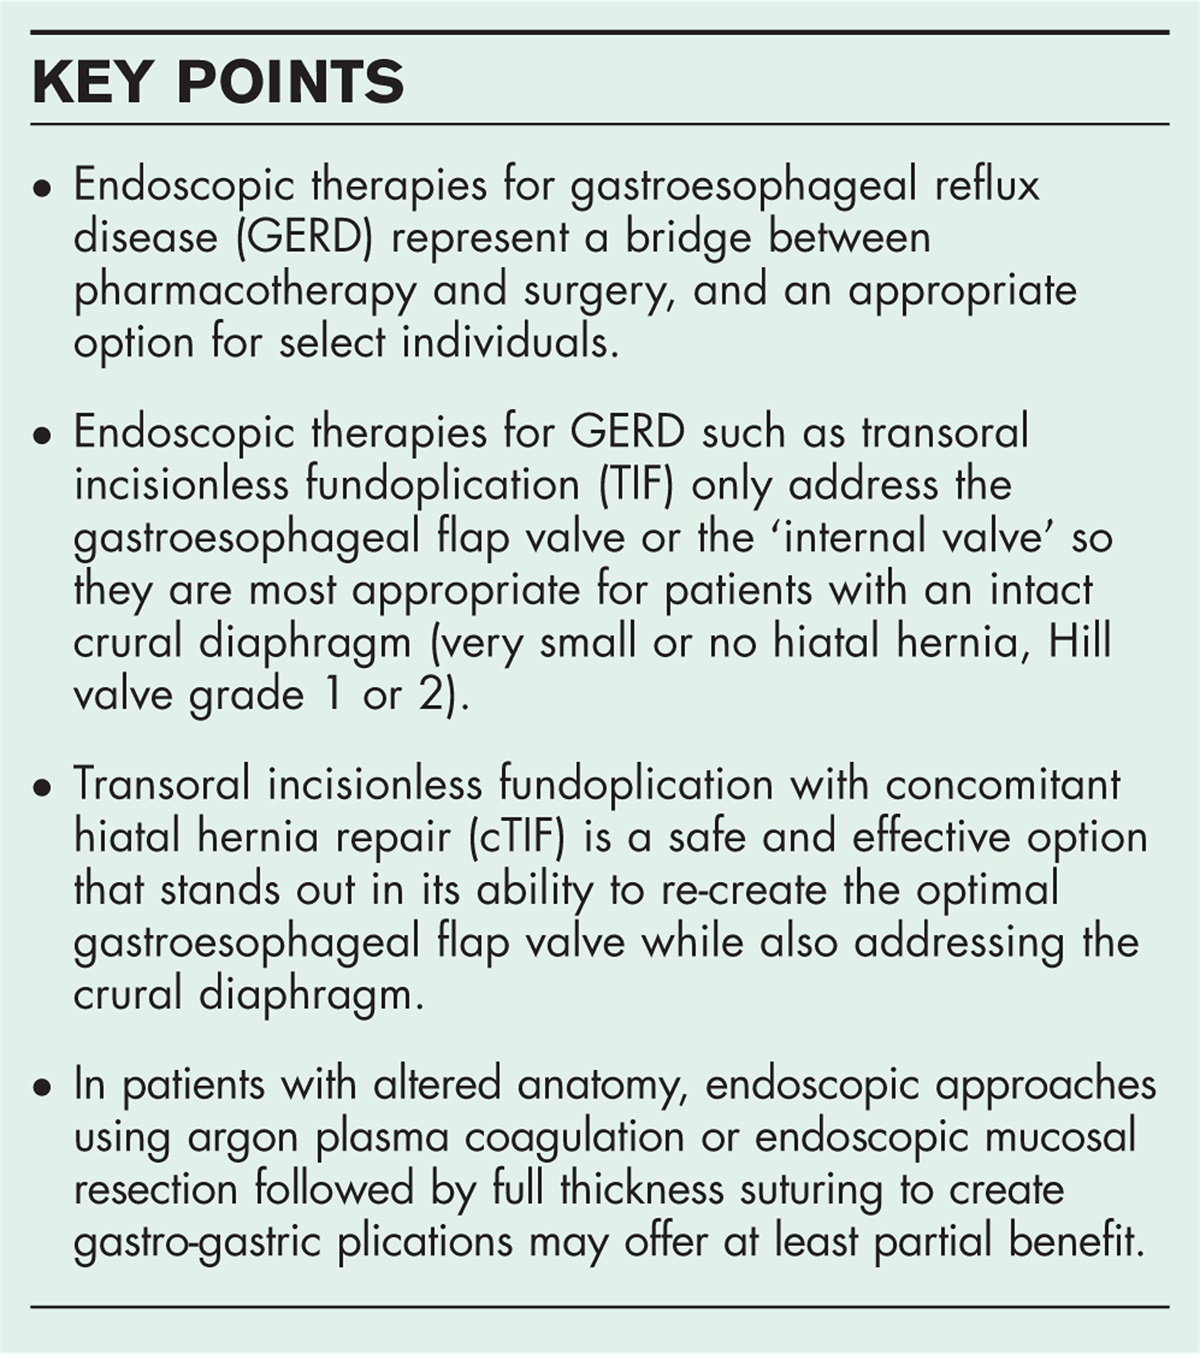 The status of endoscopic therapies for gastroesophageal reflux disease